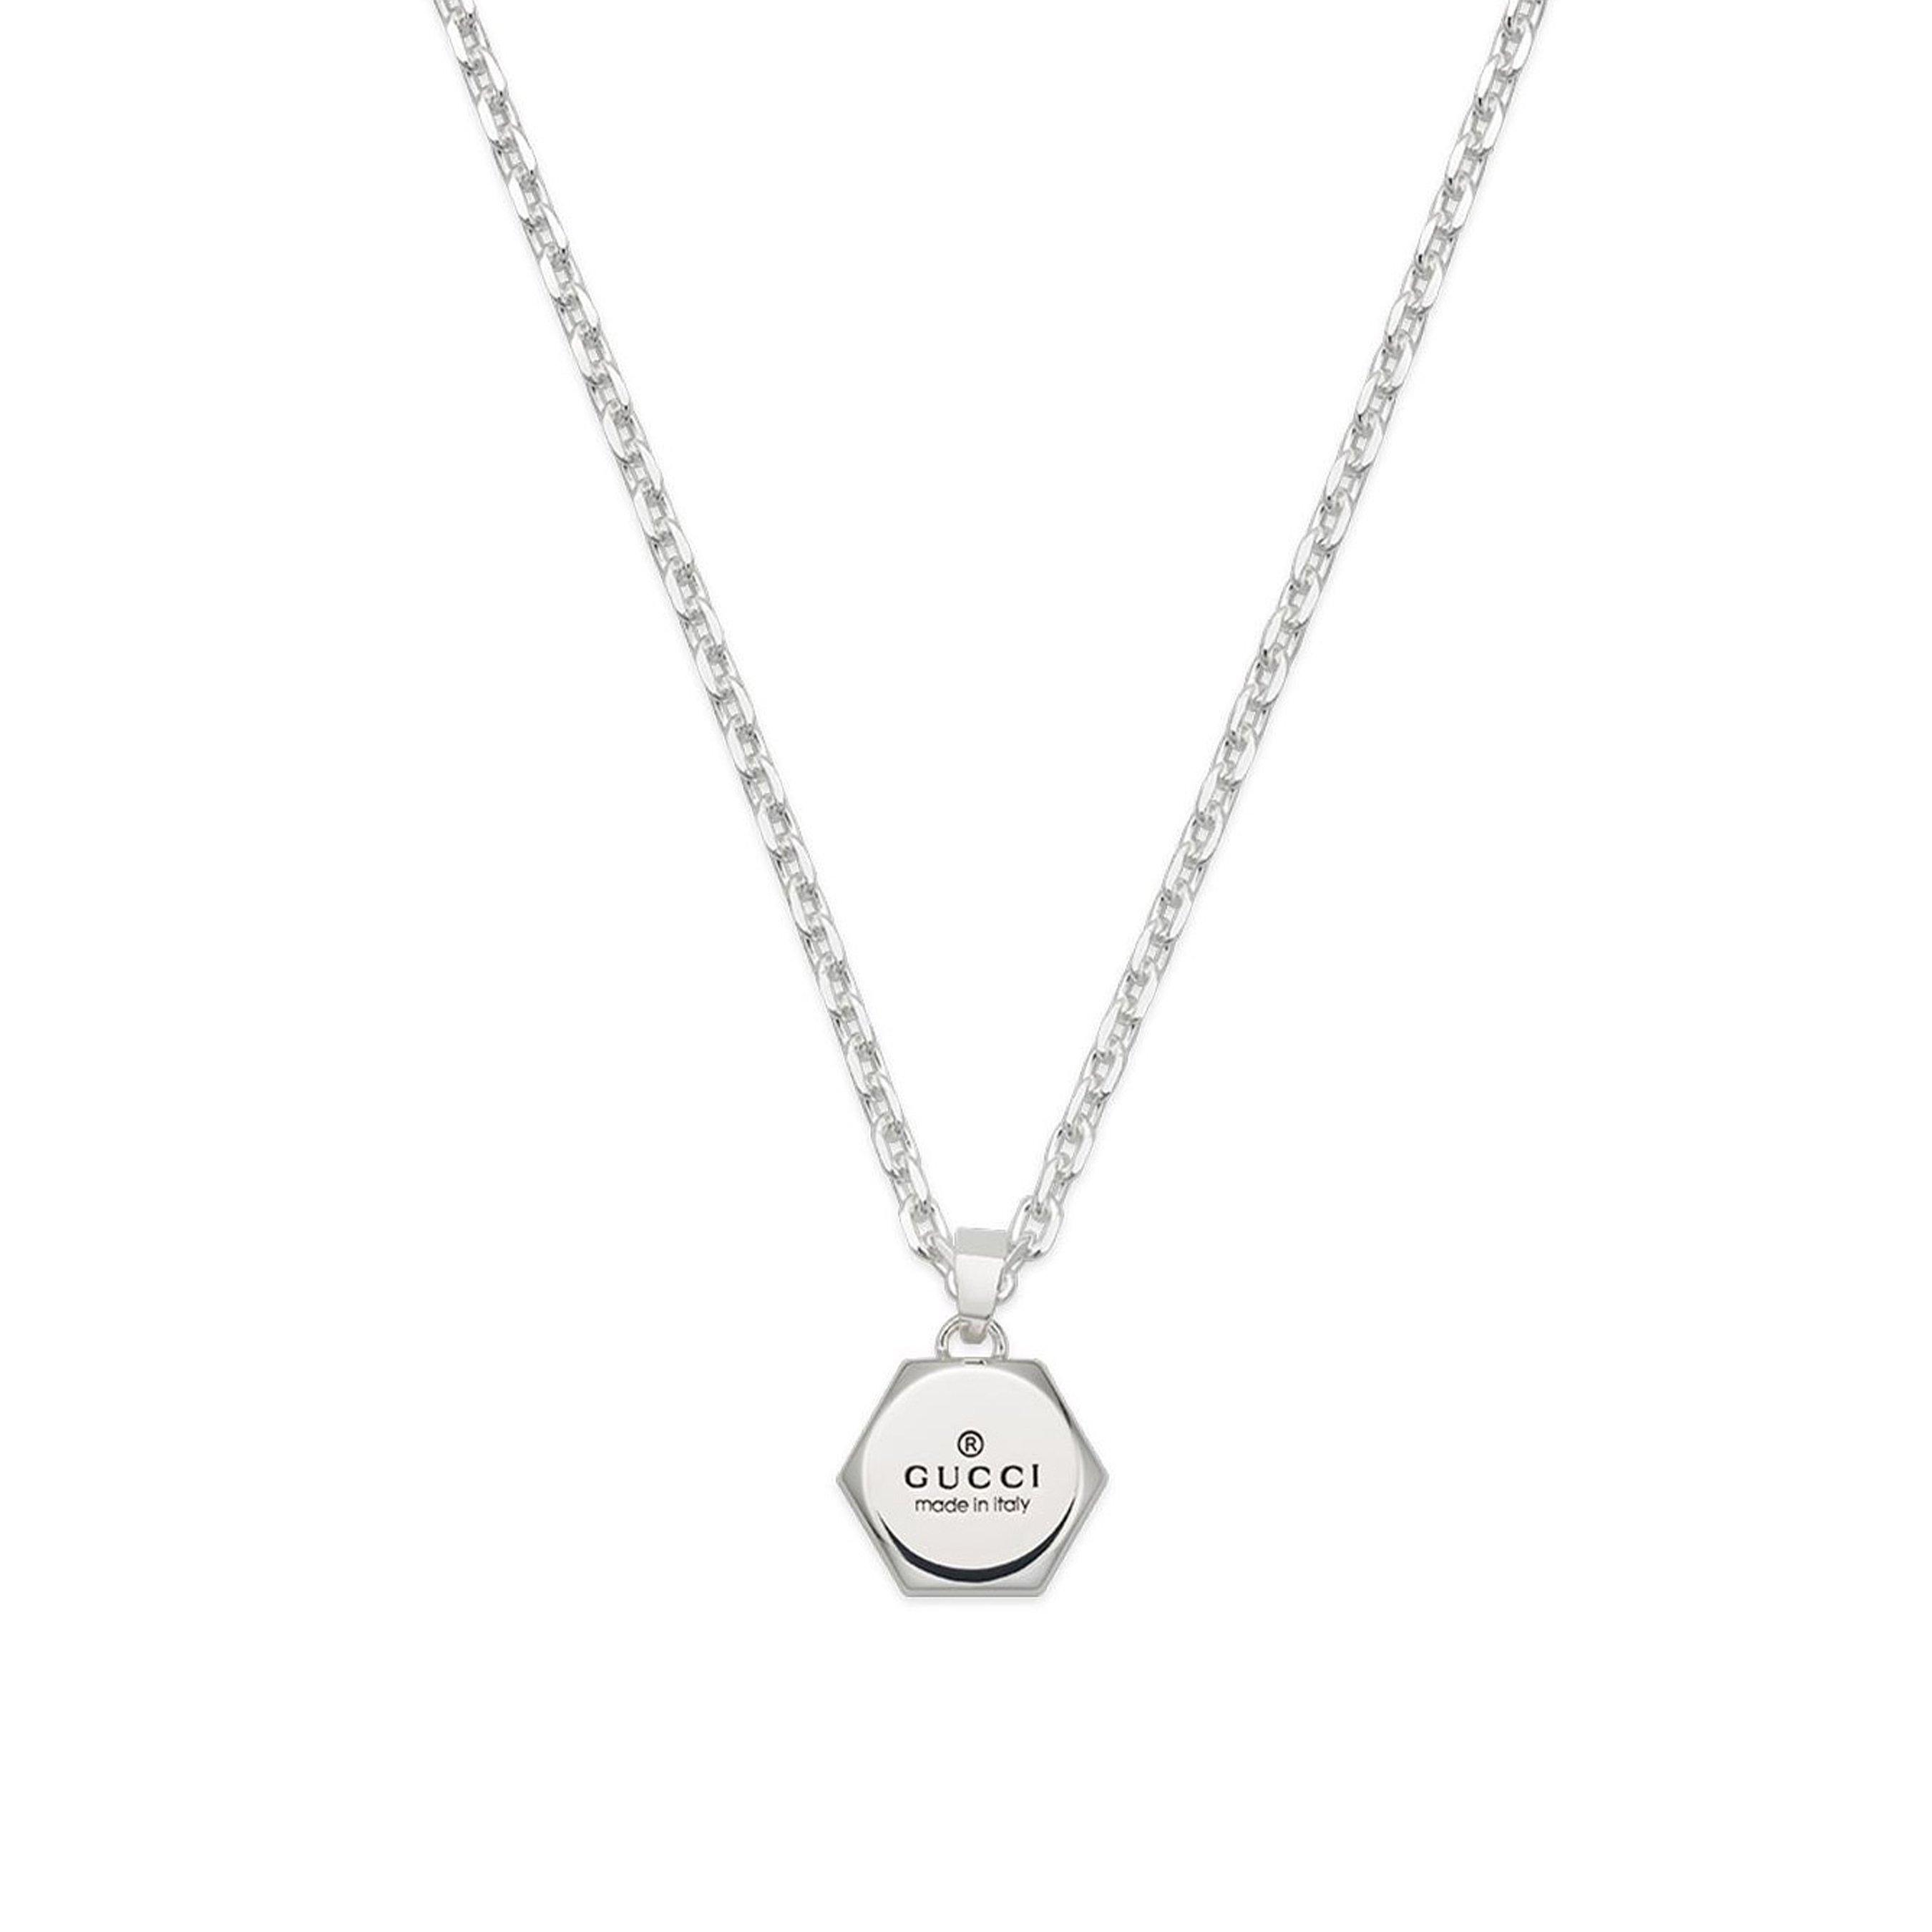 Gucci Trademark Silver Necklace | 0140848 | Beaverbrooks the Jewellers